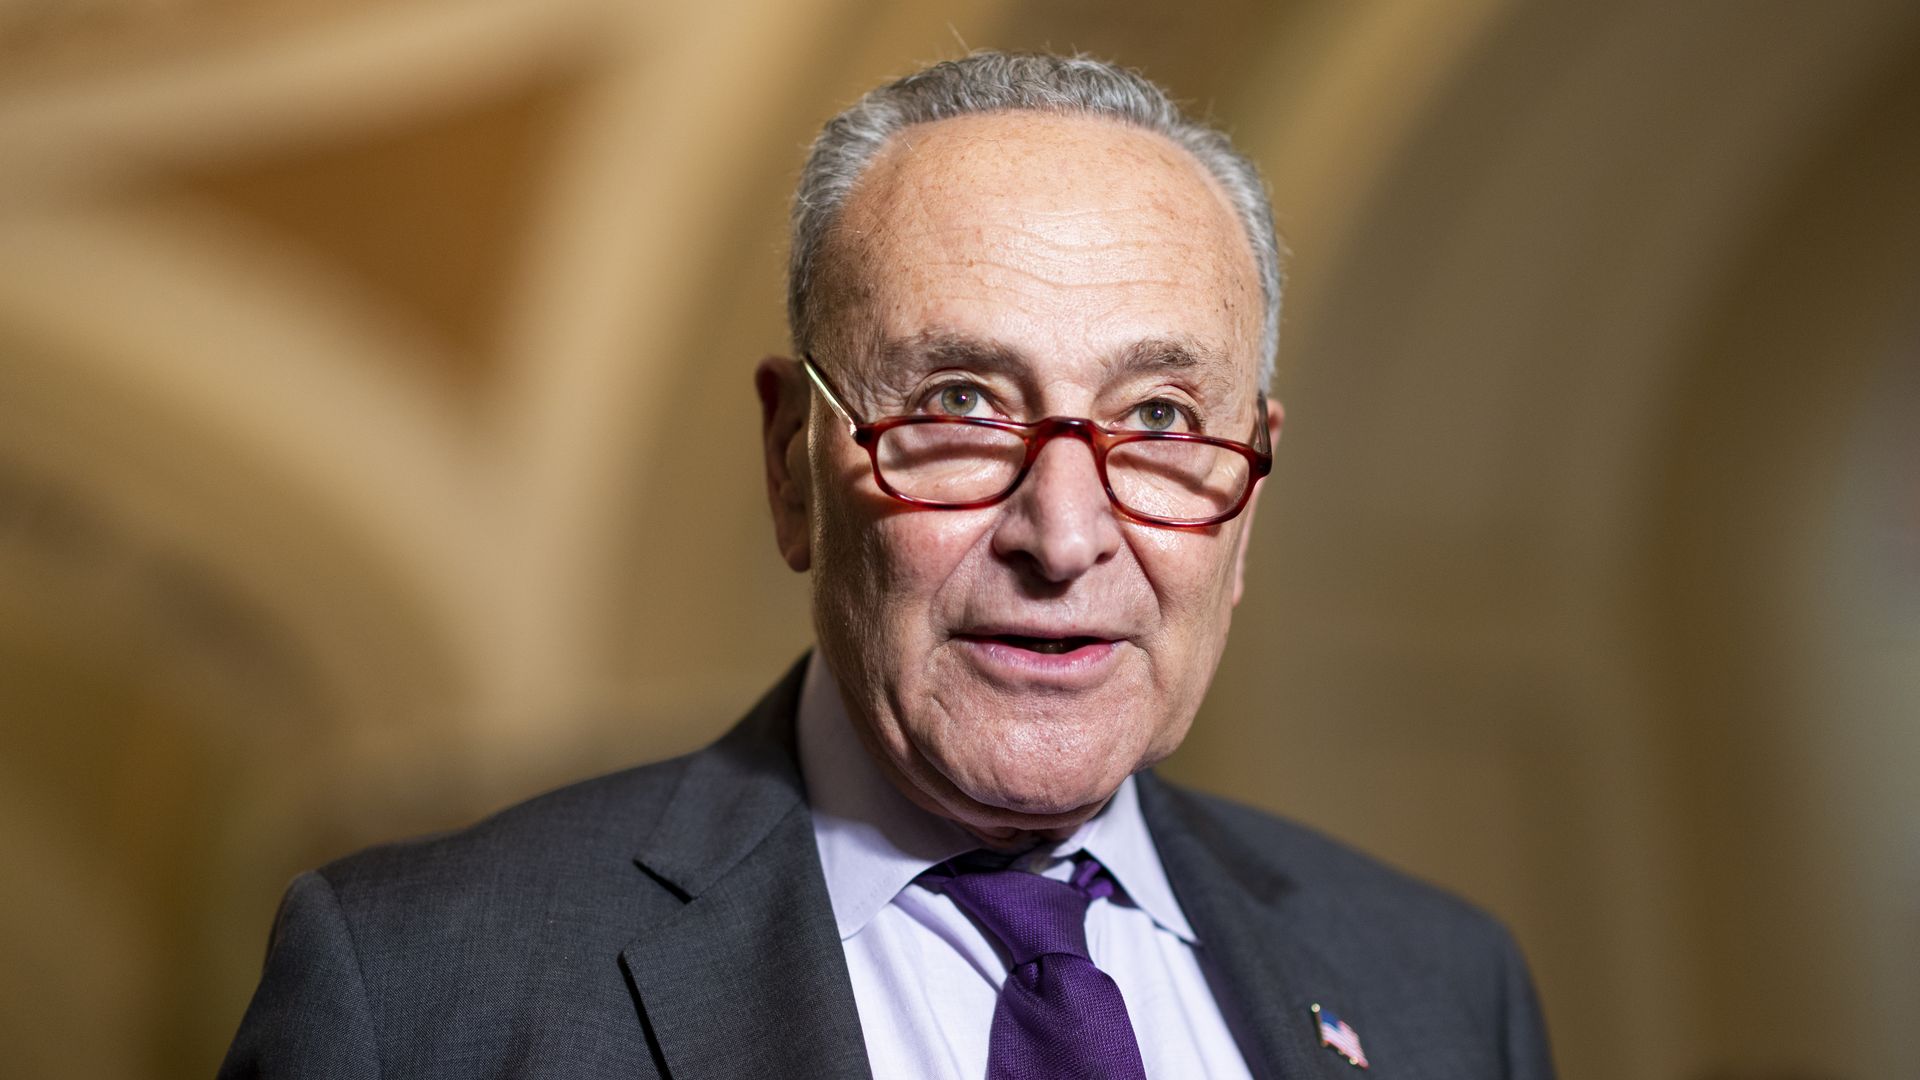 Image of Chuck Schumer.